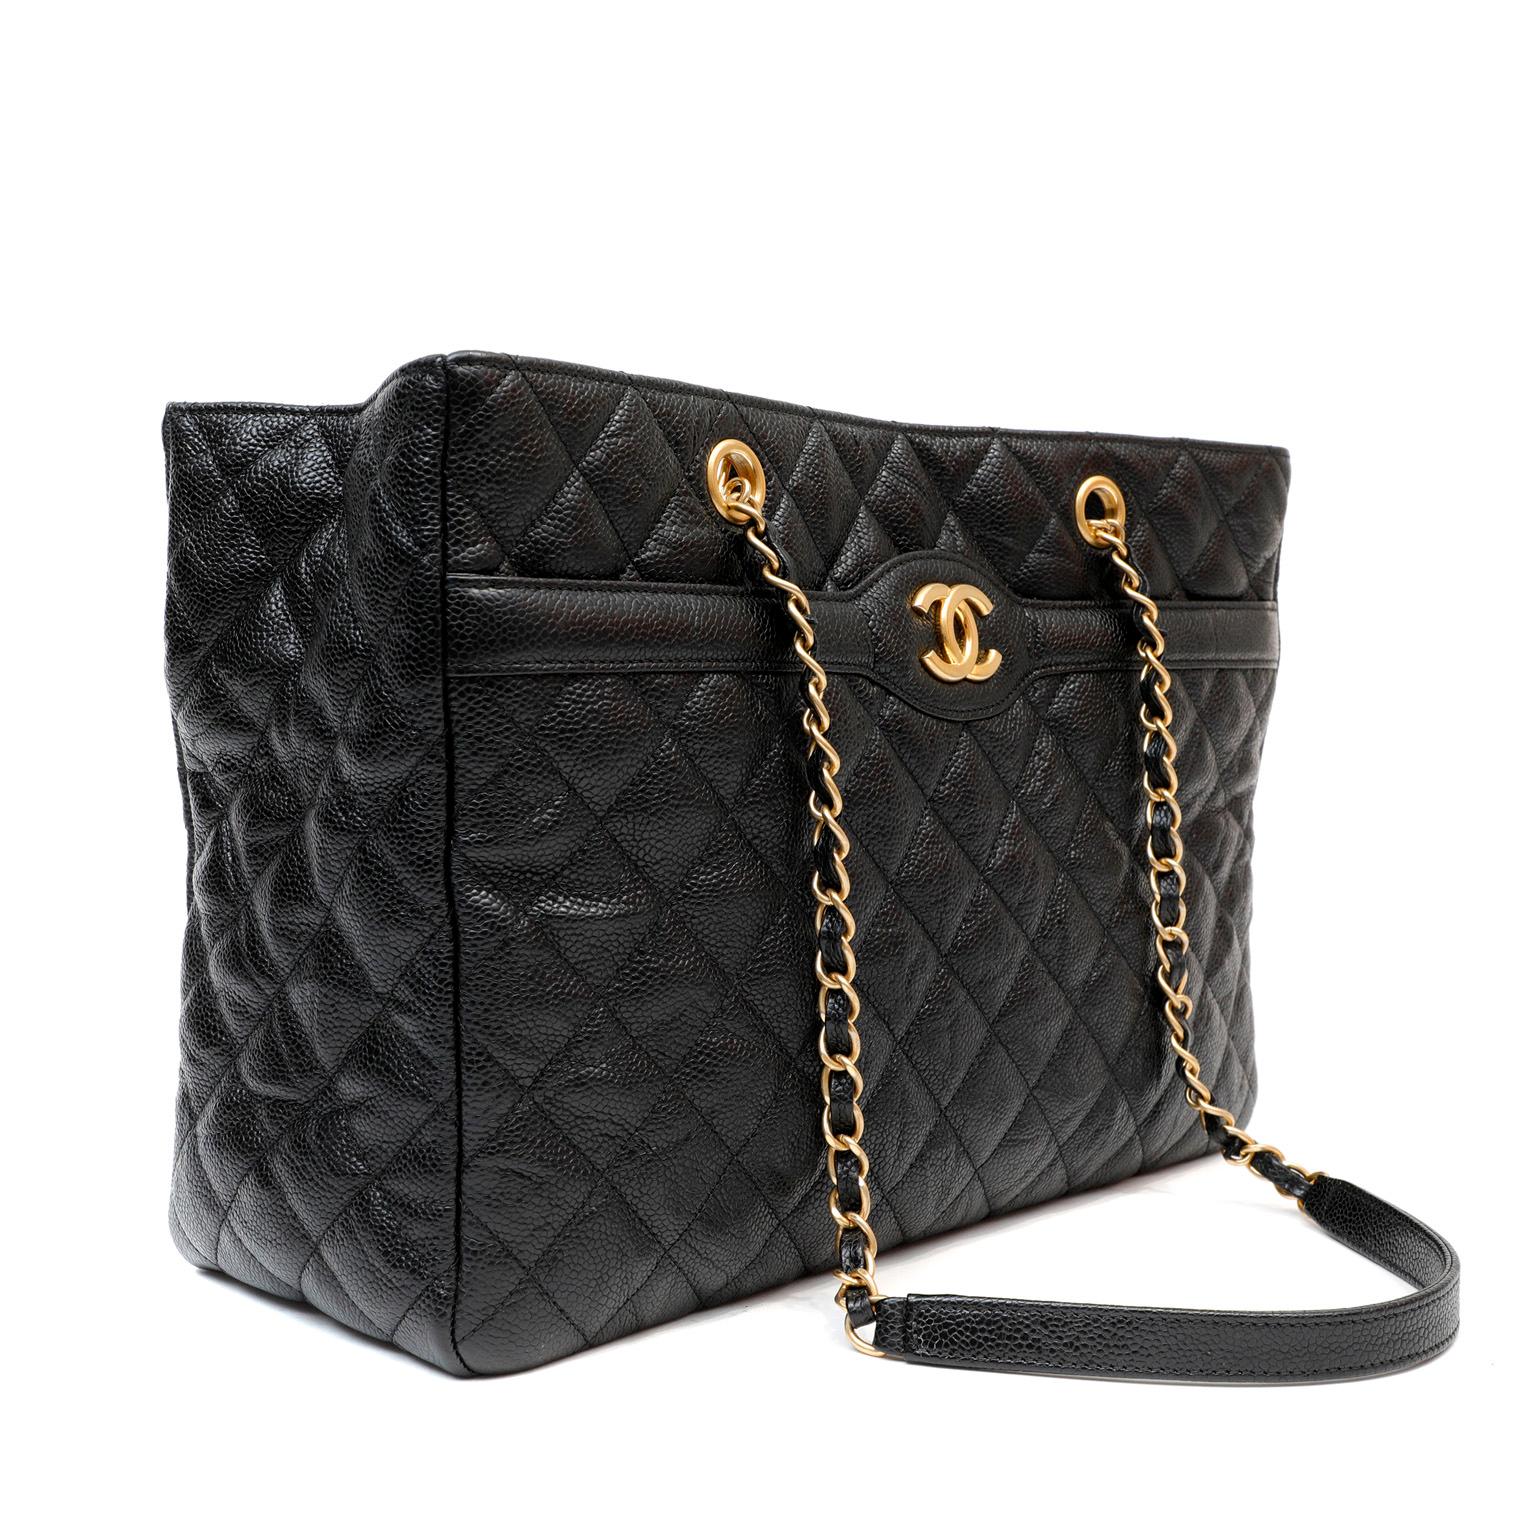 This authentic Chanel Black Caviar Leather Tote is in excellent condition.  Classic Chanel design in durable textured black Caviar leather.  Quilted in signature Chanel diamond pattern with matte gold hardware accents.  Leather and chain entwined